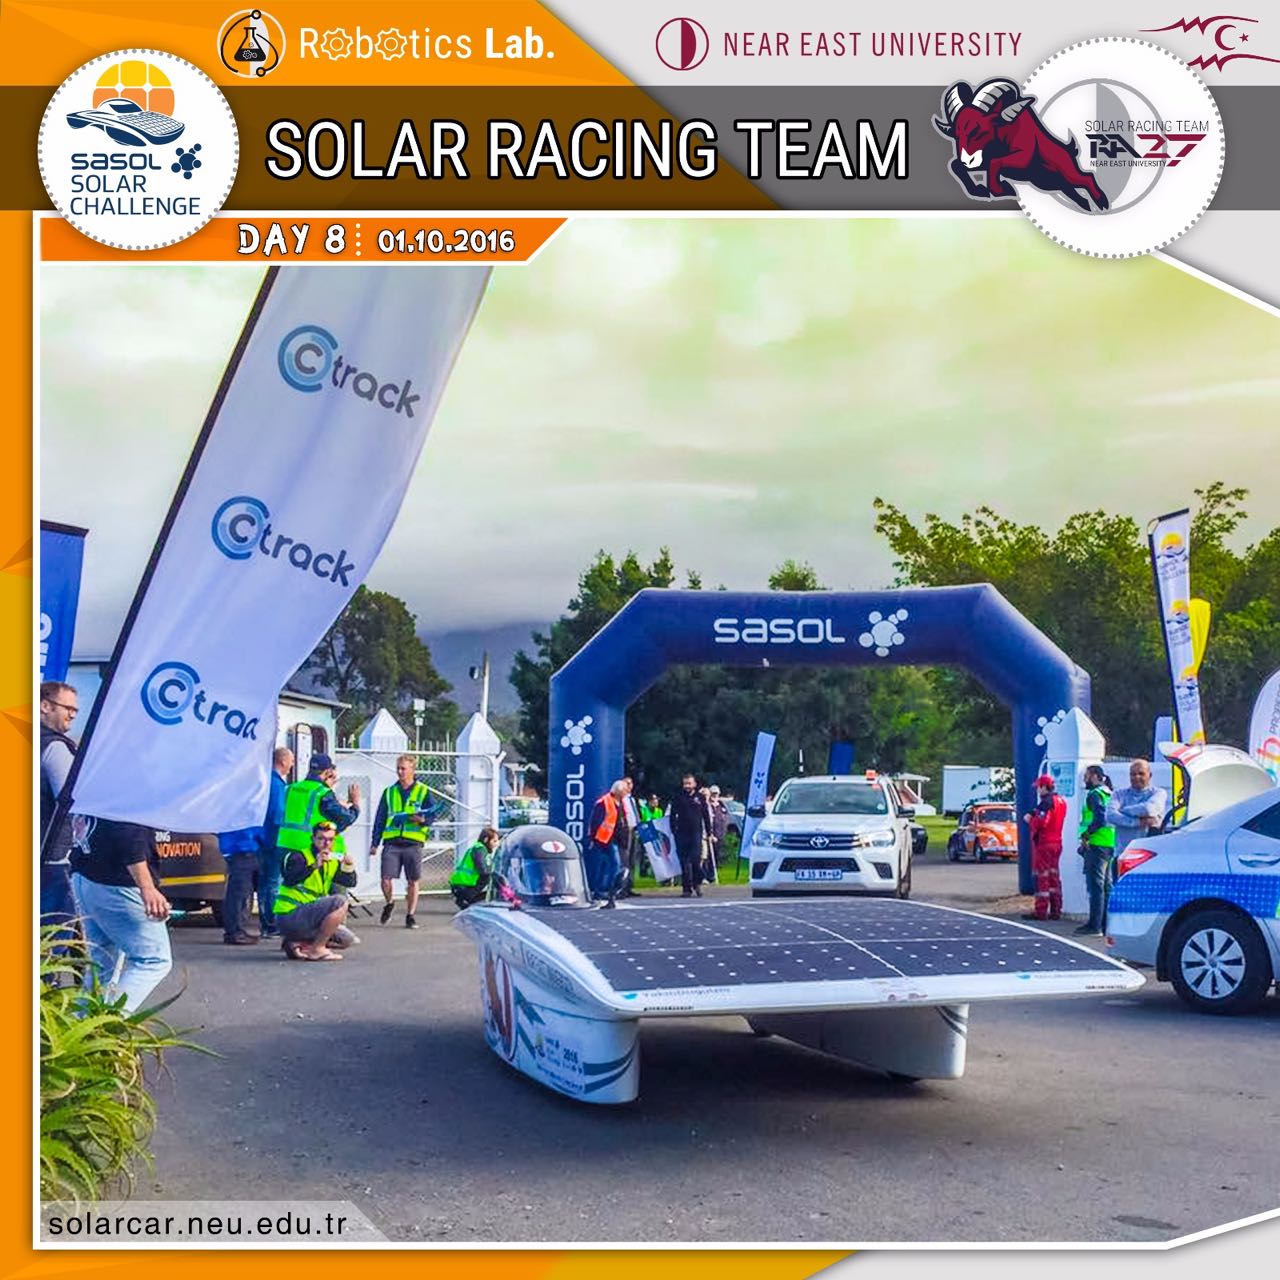 In South Africa Challenge, NEU-RA 27 ranks the leader-board as the 6th best solar team of the world